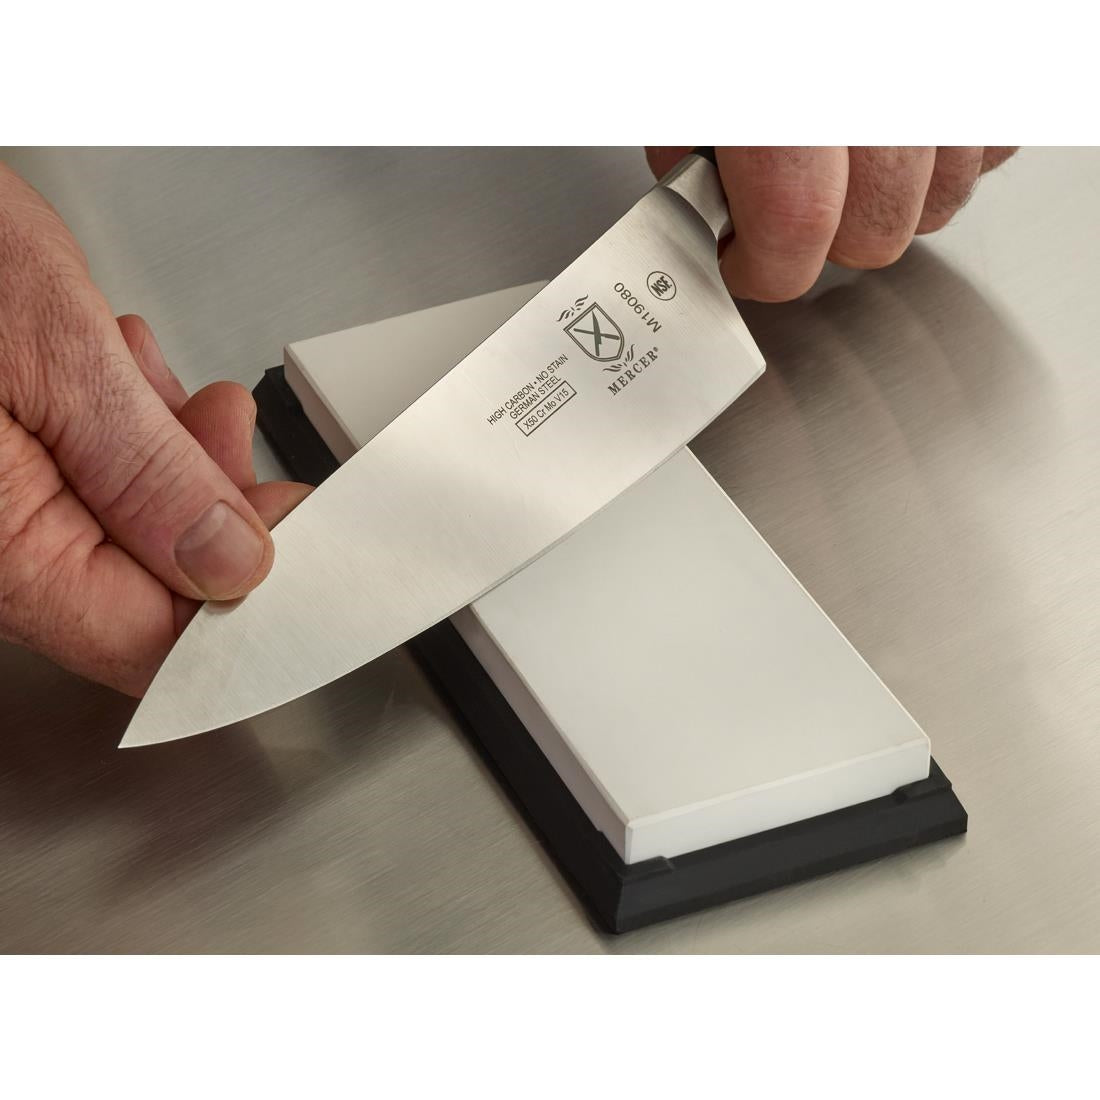 FW701 Mercer Culinary ZuM Precision Forged Chef's Knife 20.5cm JD Catering Equipment Solutions Ltd